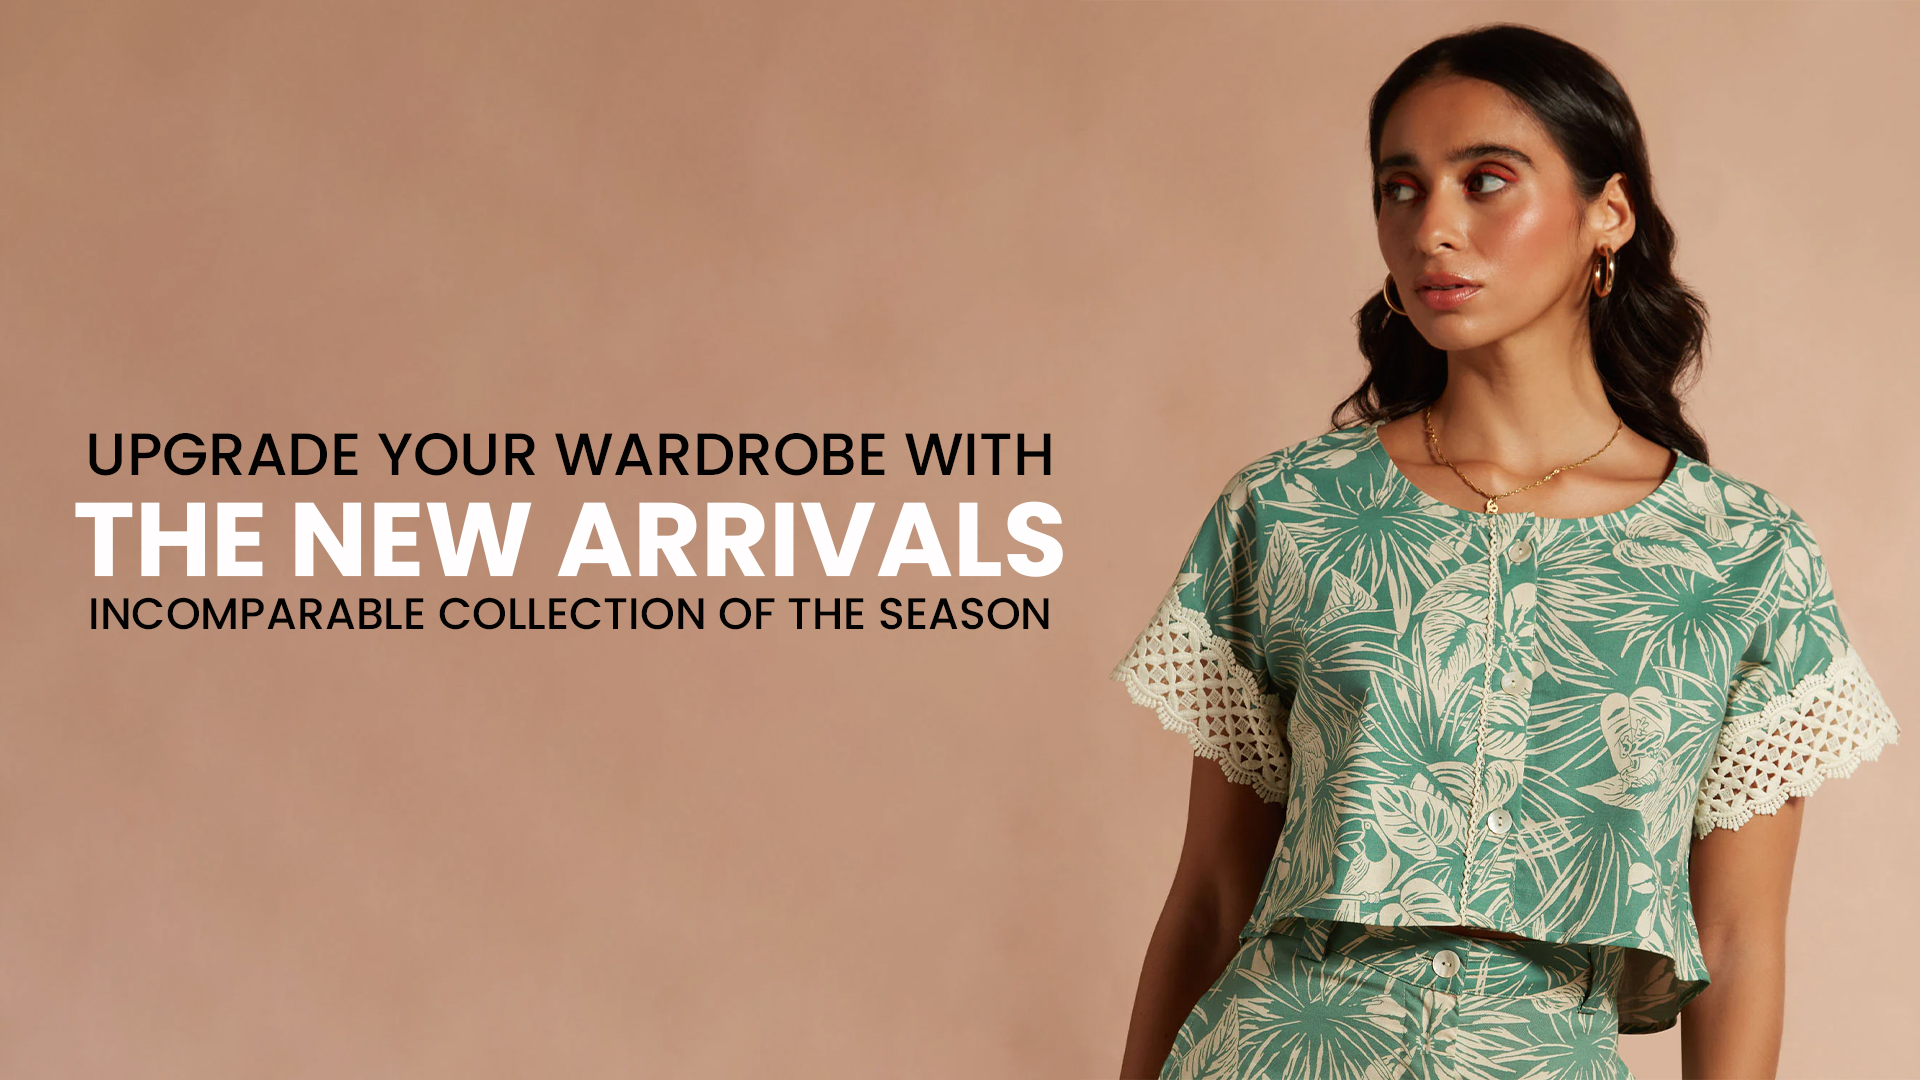 UPGRADE YOUR WARDROBE WITH THE NEW ARRIVALS - INCOMPARABLE COLLECTION OF THE SEASON